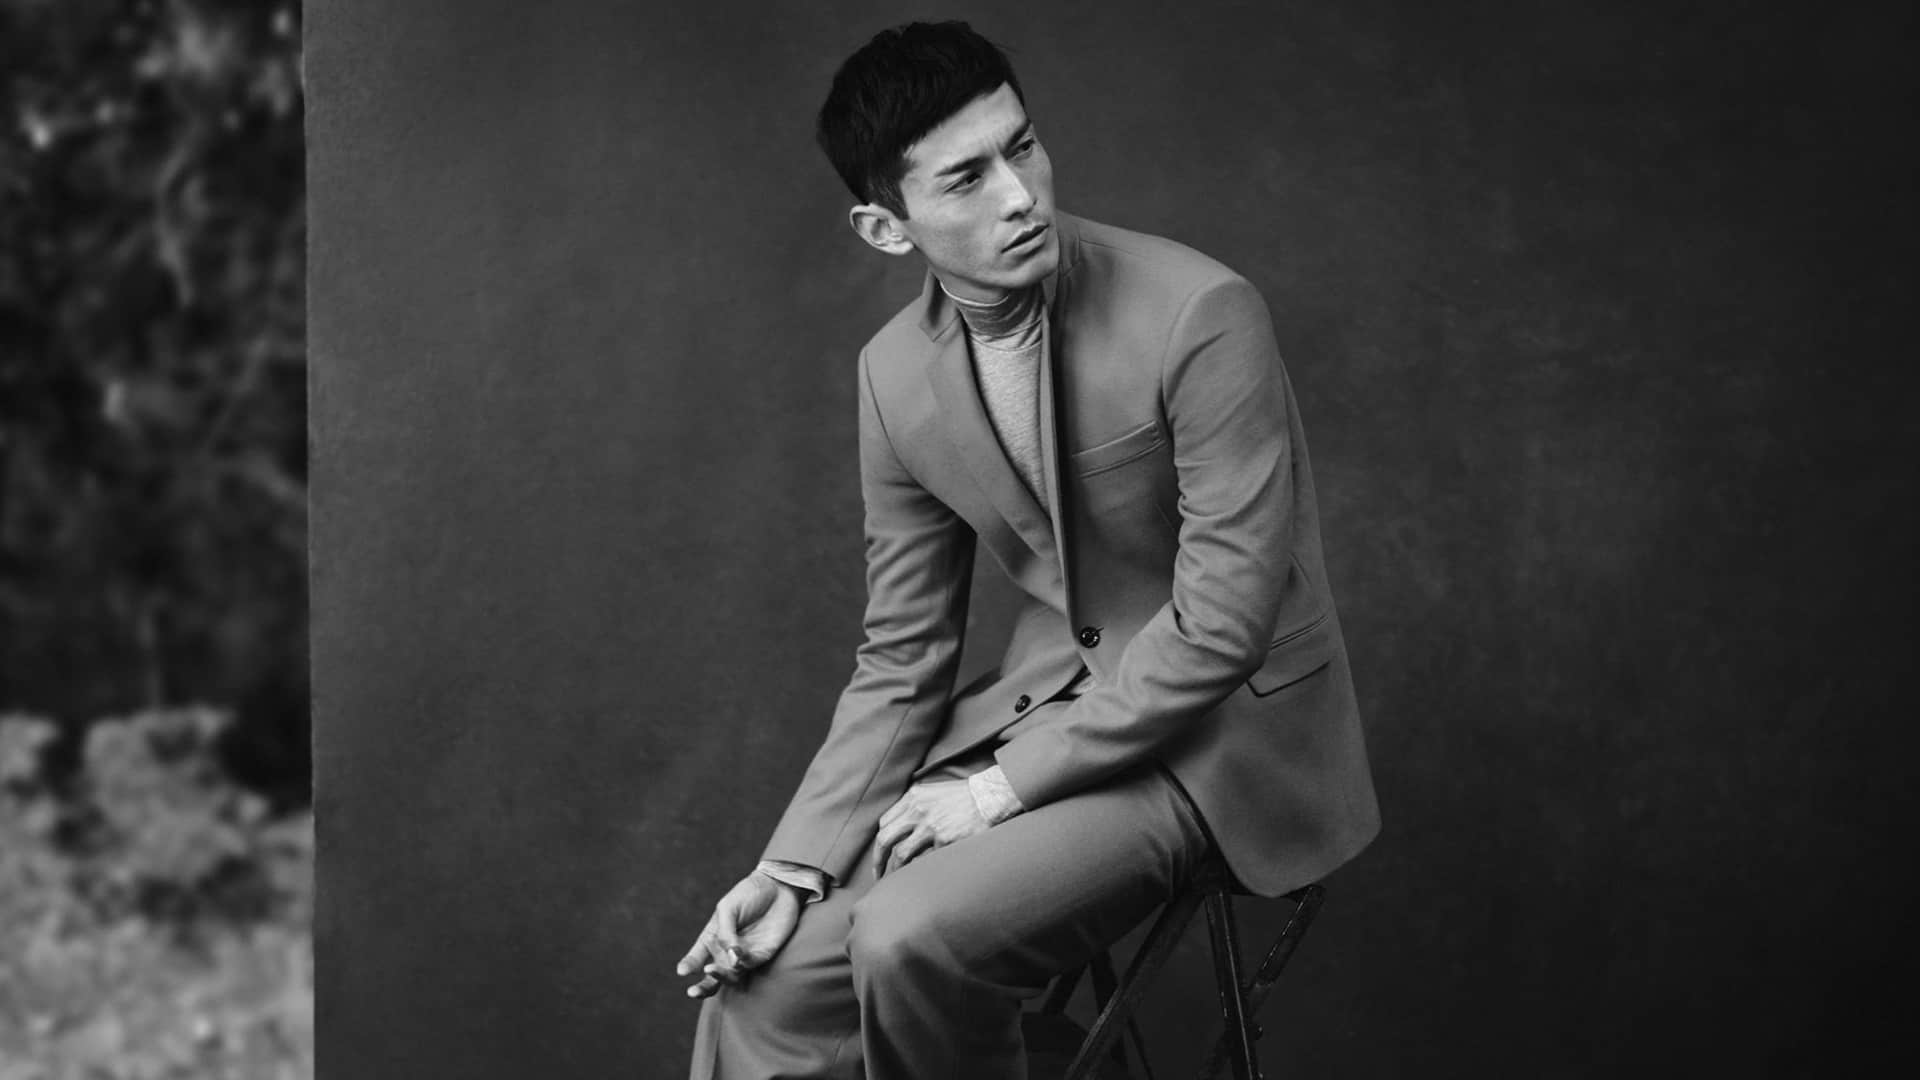 Daisuke Ueda is one of The 15 Most Influential Asian Male Models In The Fashion Industry